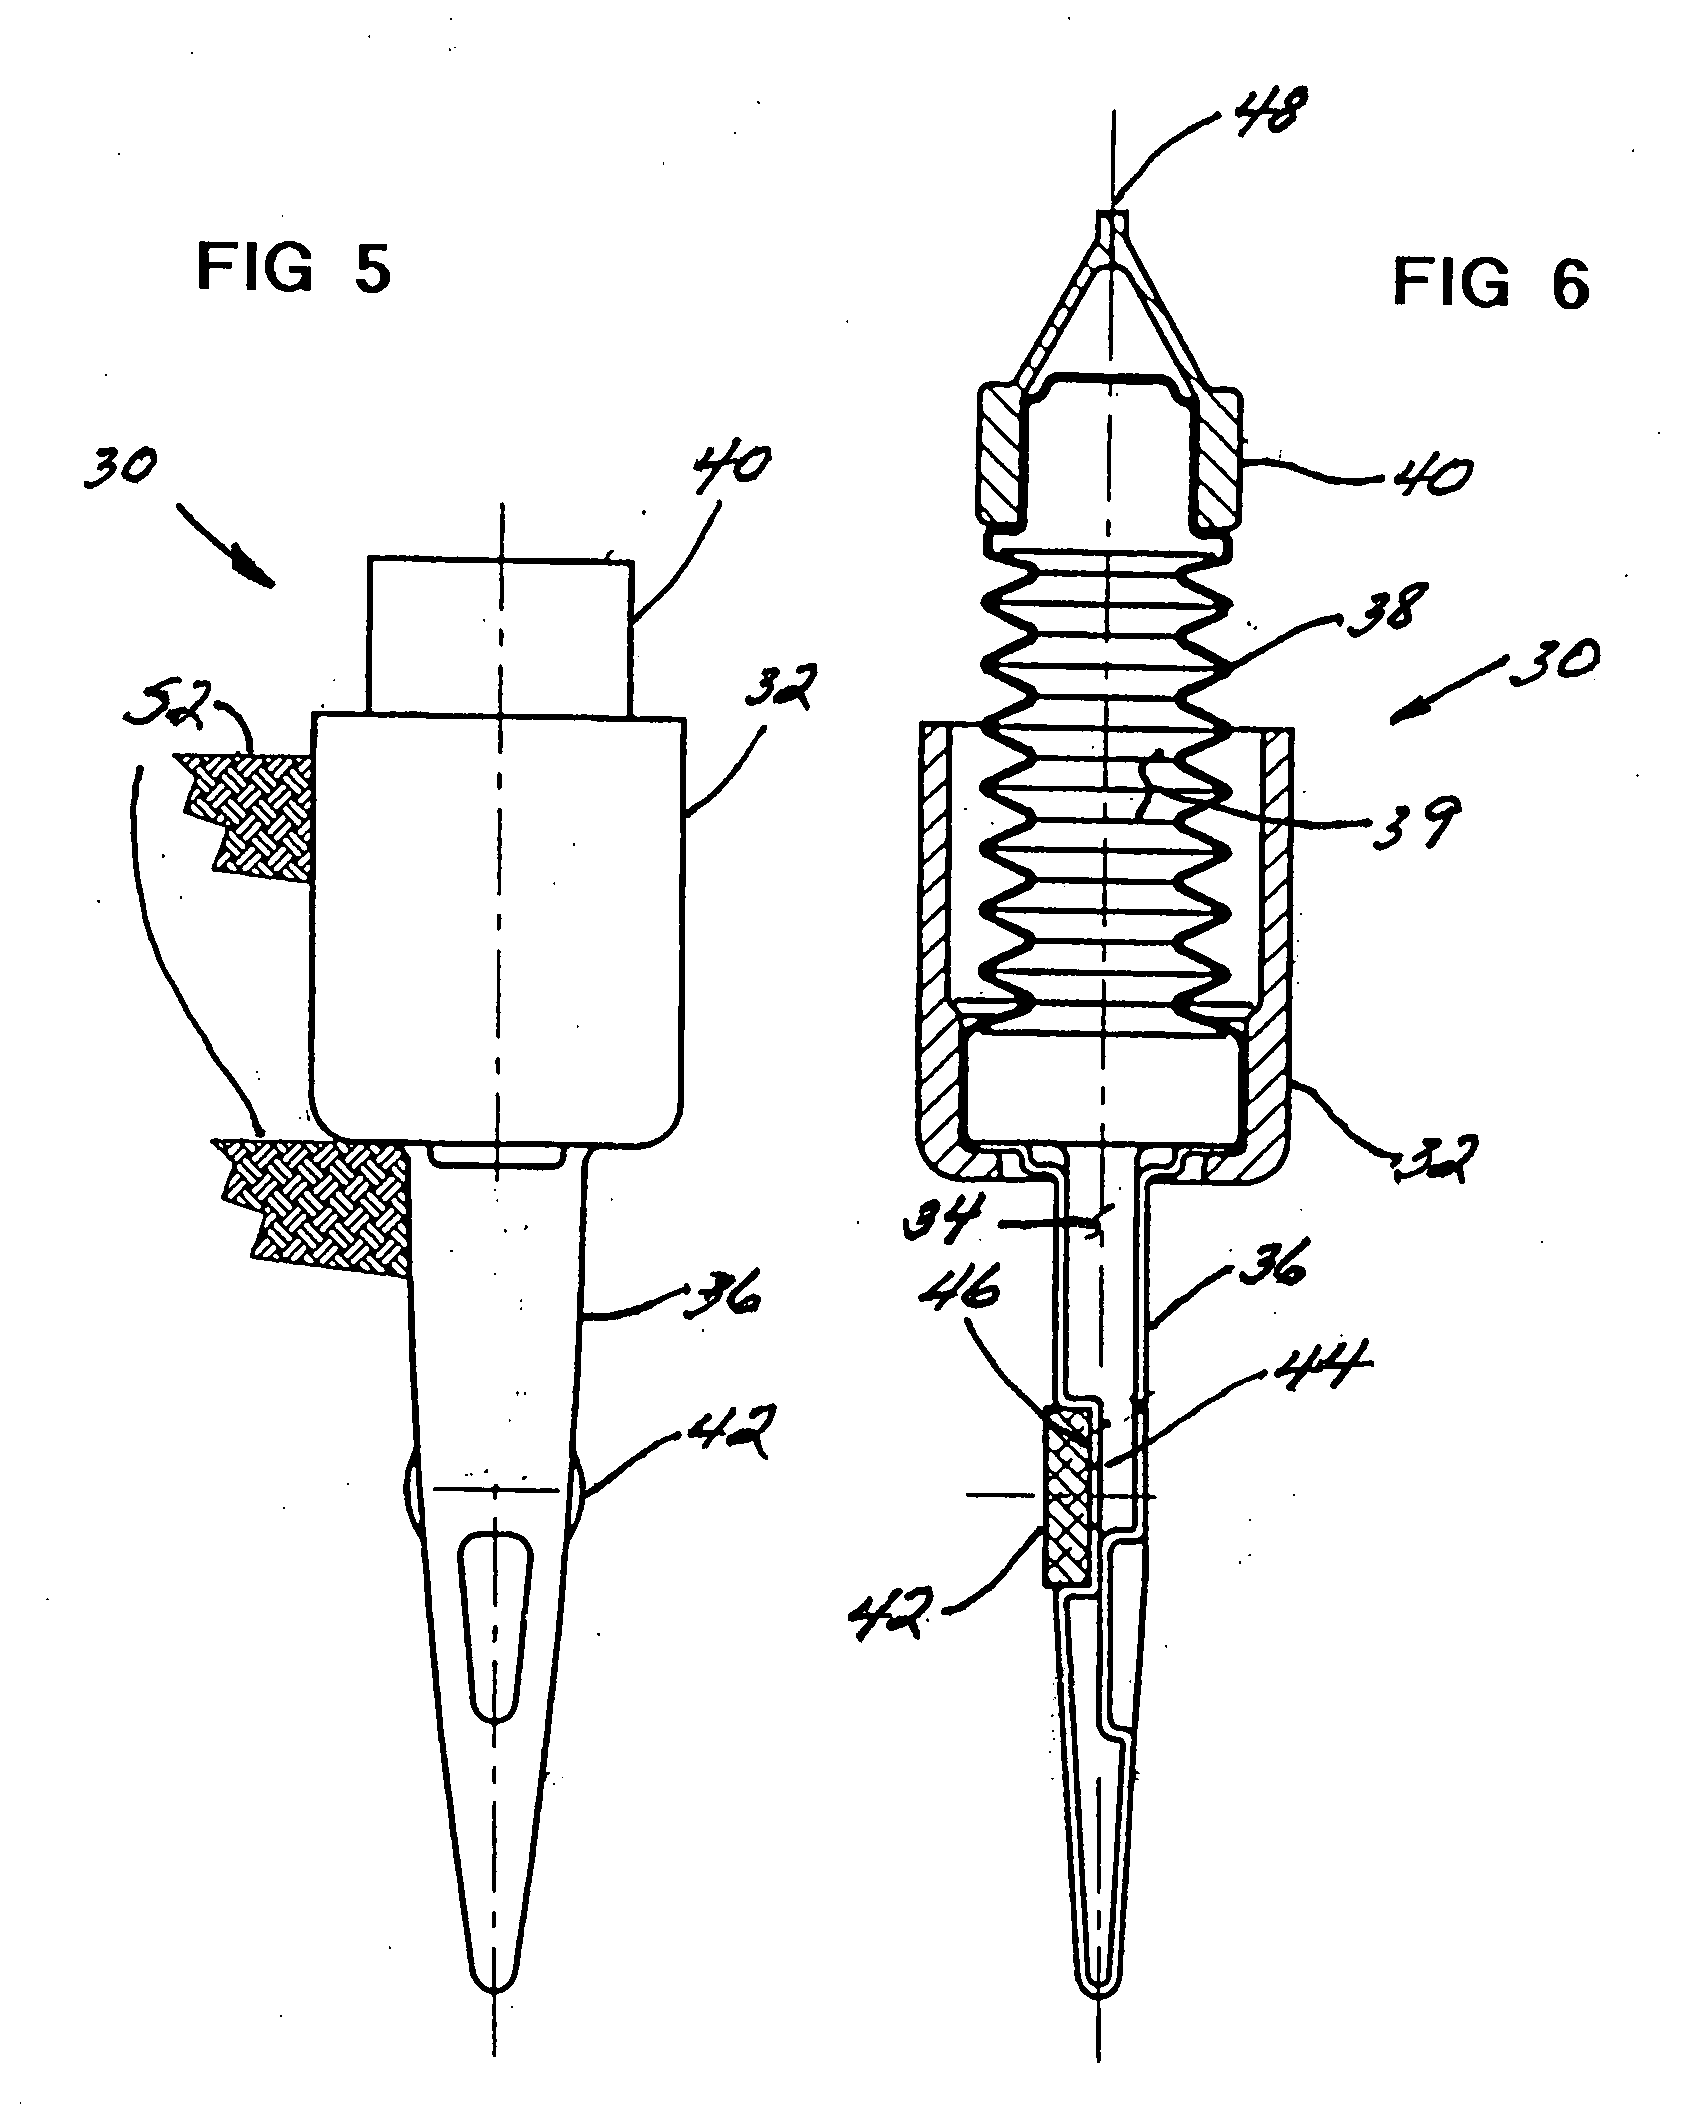 Apparatus for monitoring and regulating soil moisture